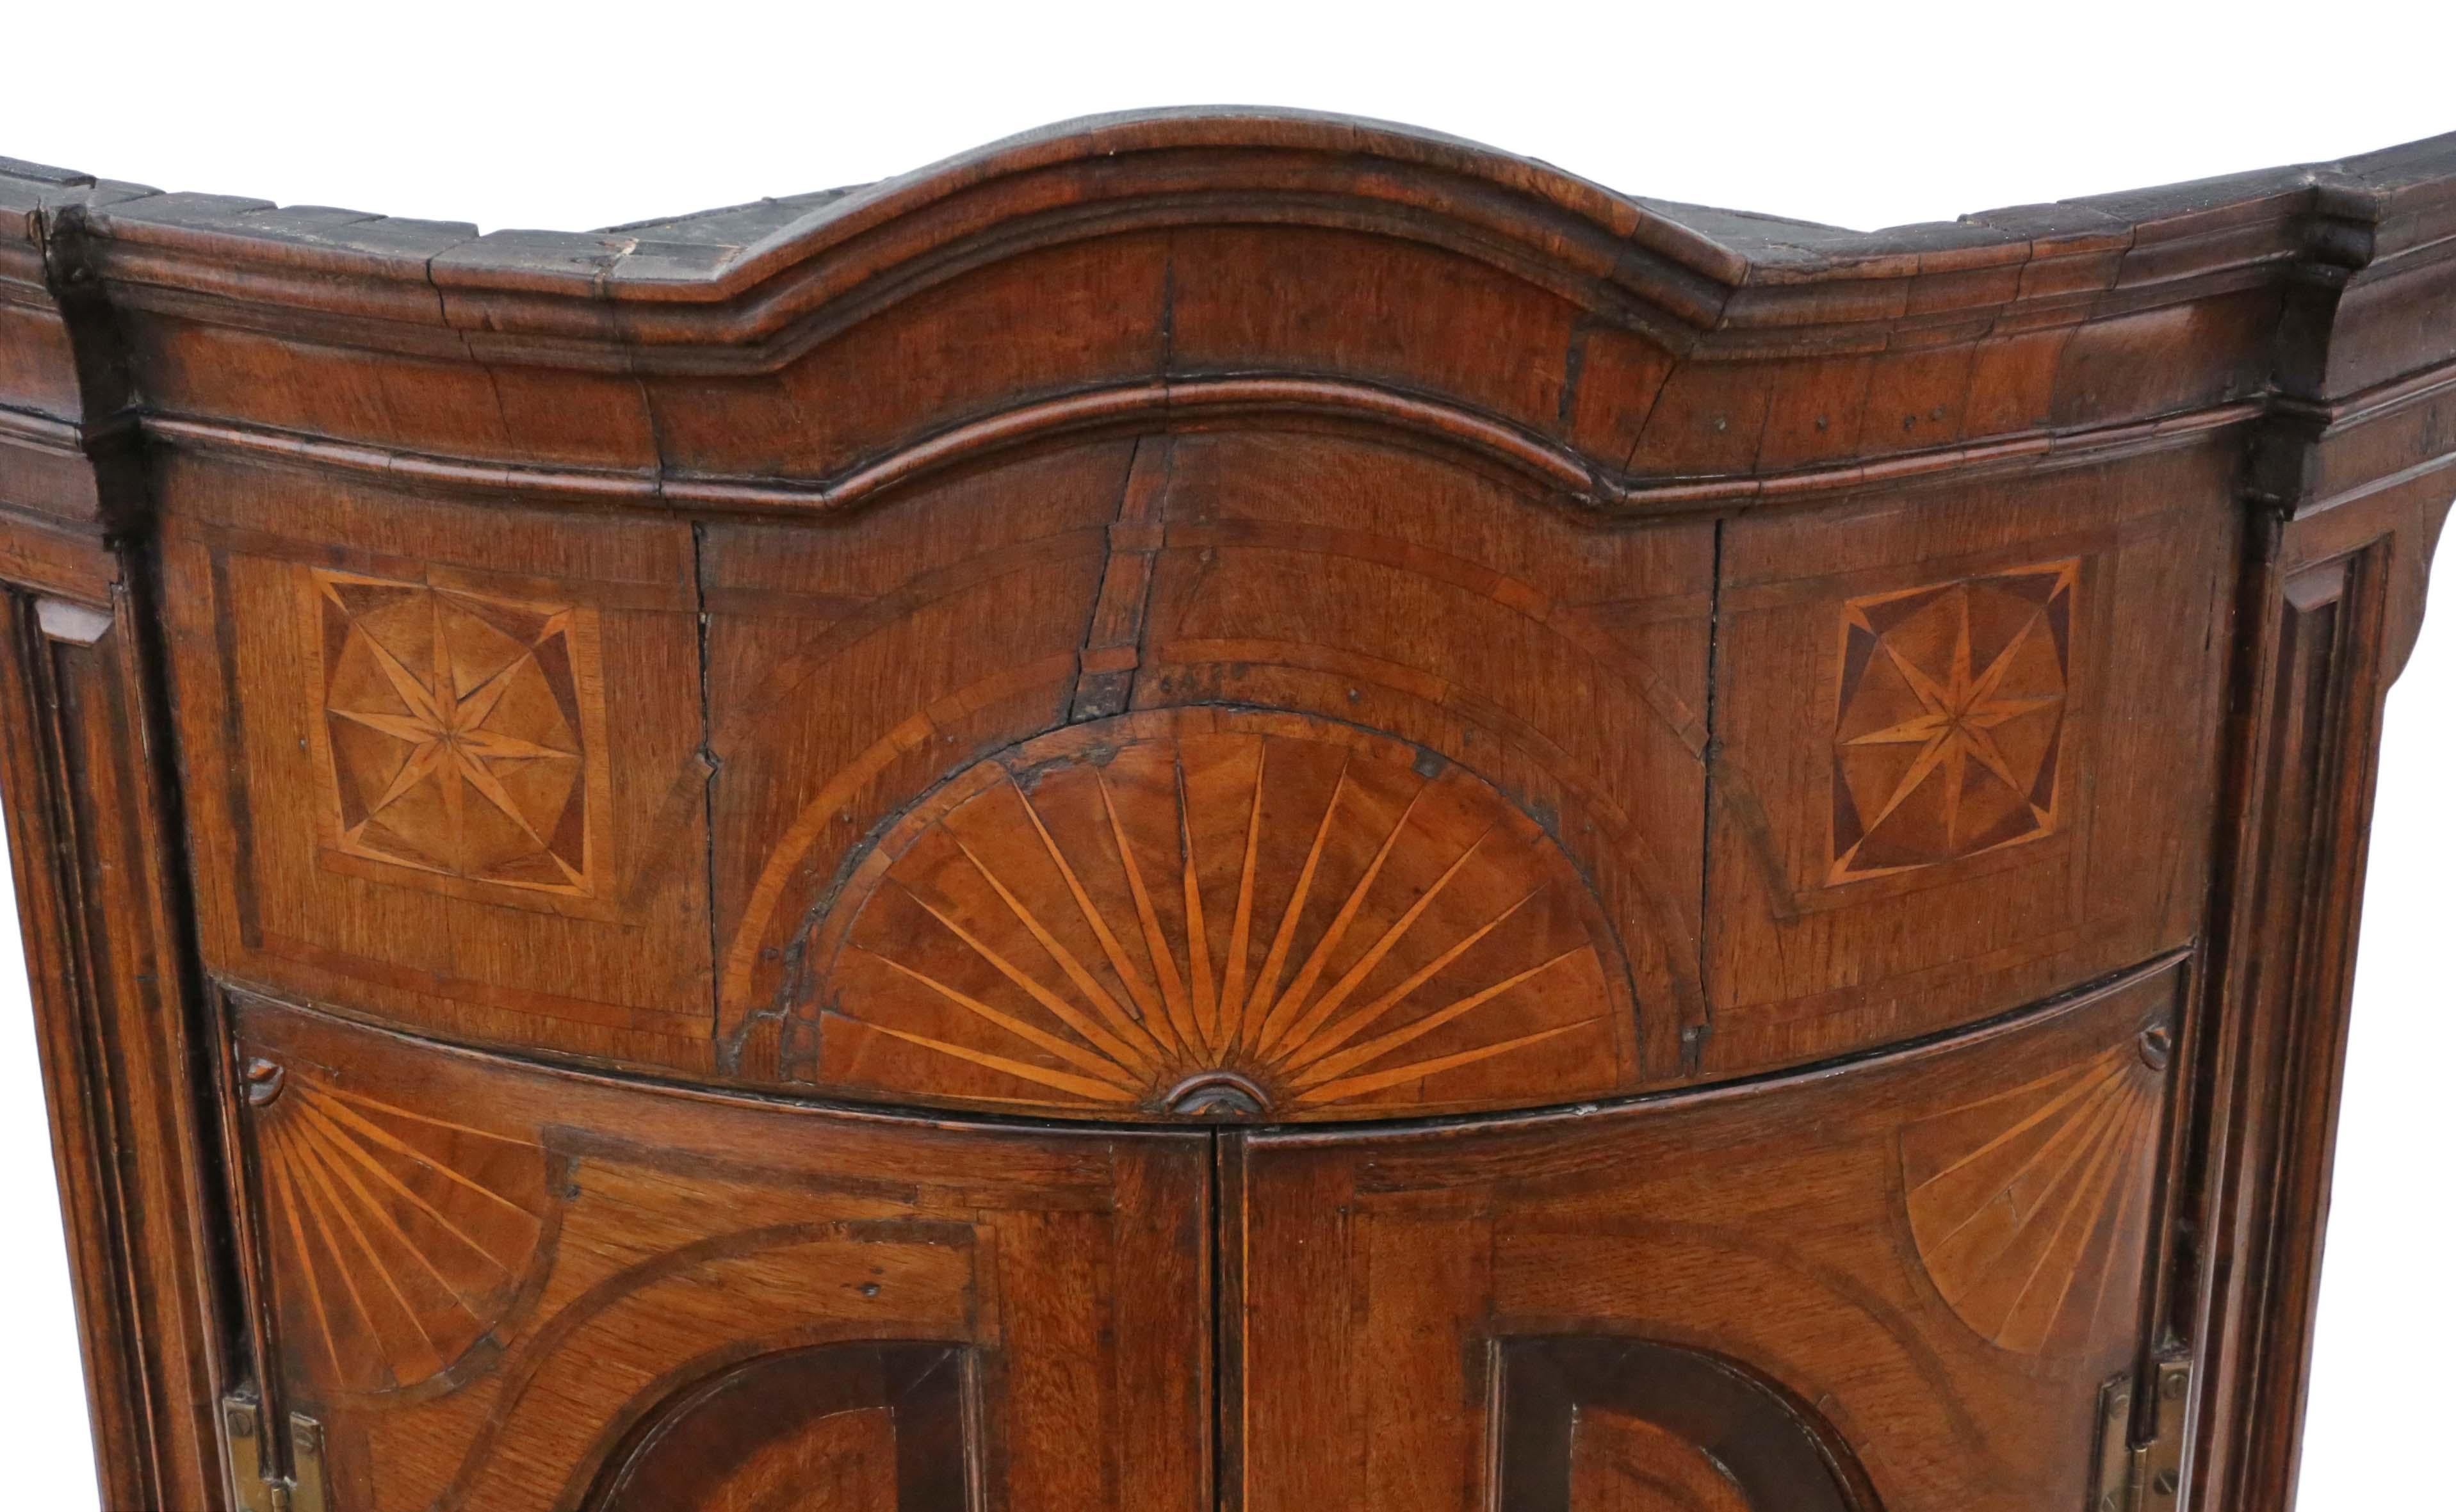 Antique quality Georgian circa 1760 inlaid crossbanded oak barrelled corner cupboard. A wonderful impressive rare quality period piece.
Solid and strong, with no loose joints. Full of age, character and charm.
Would look great in the right